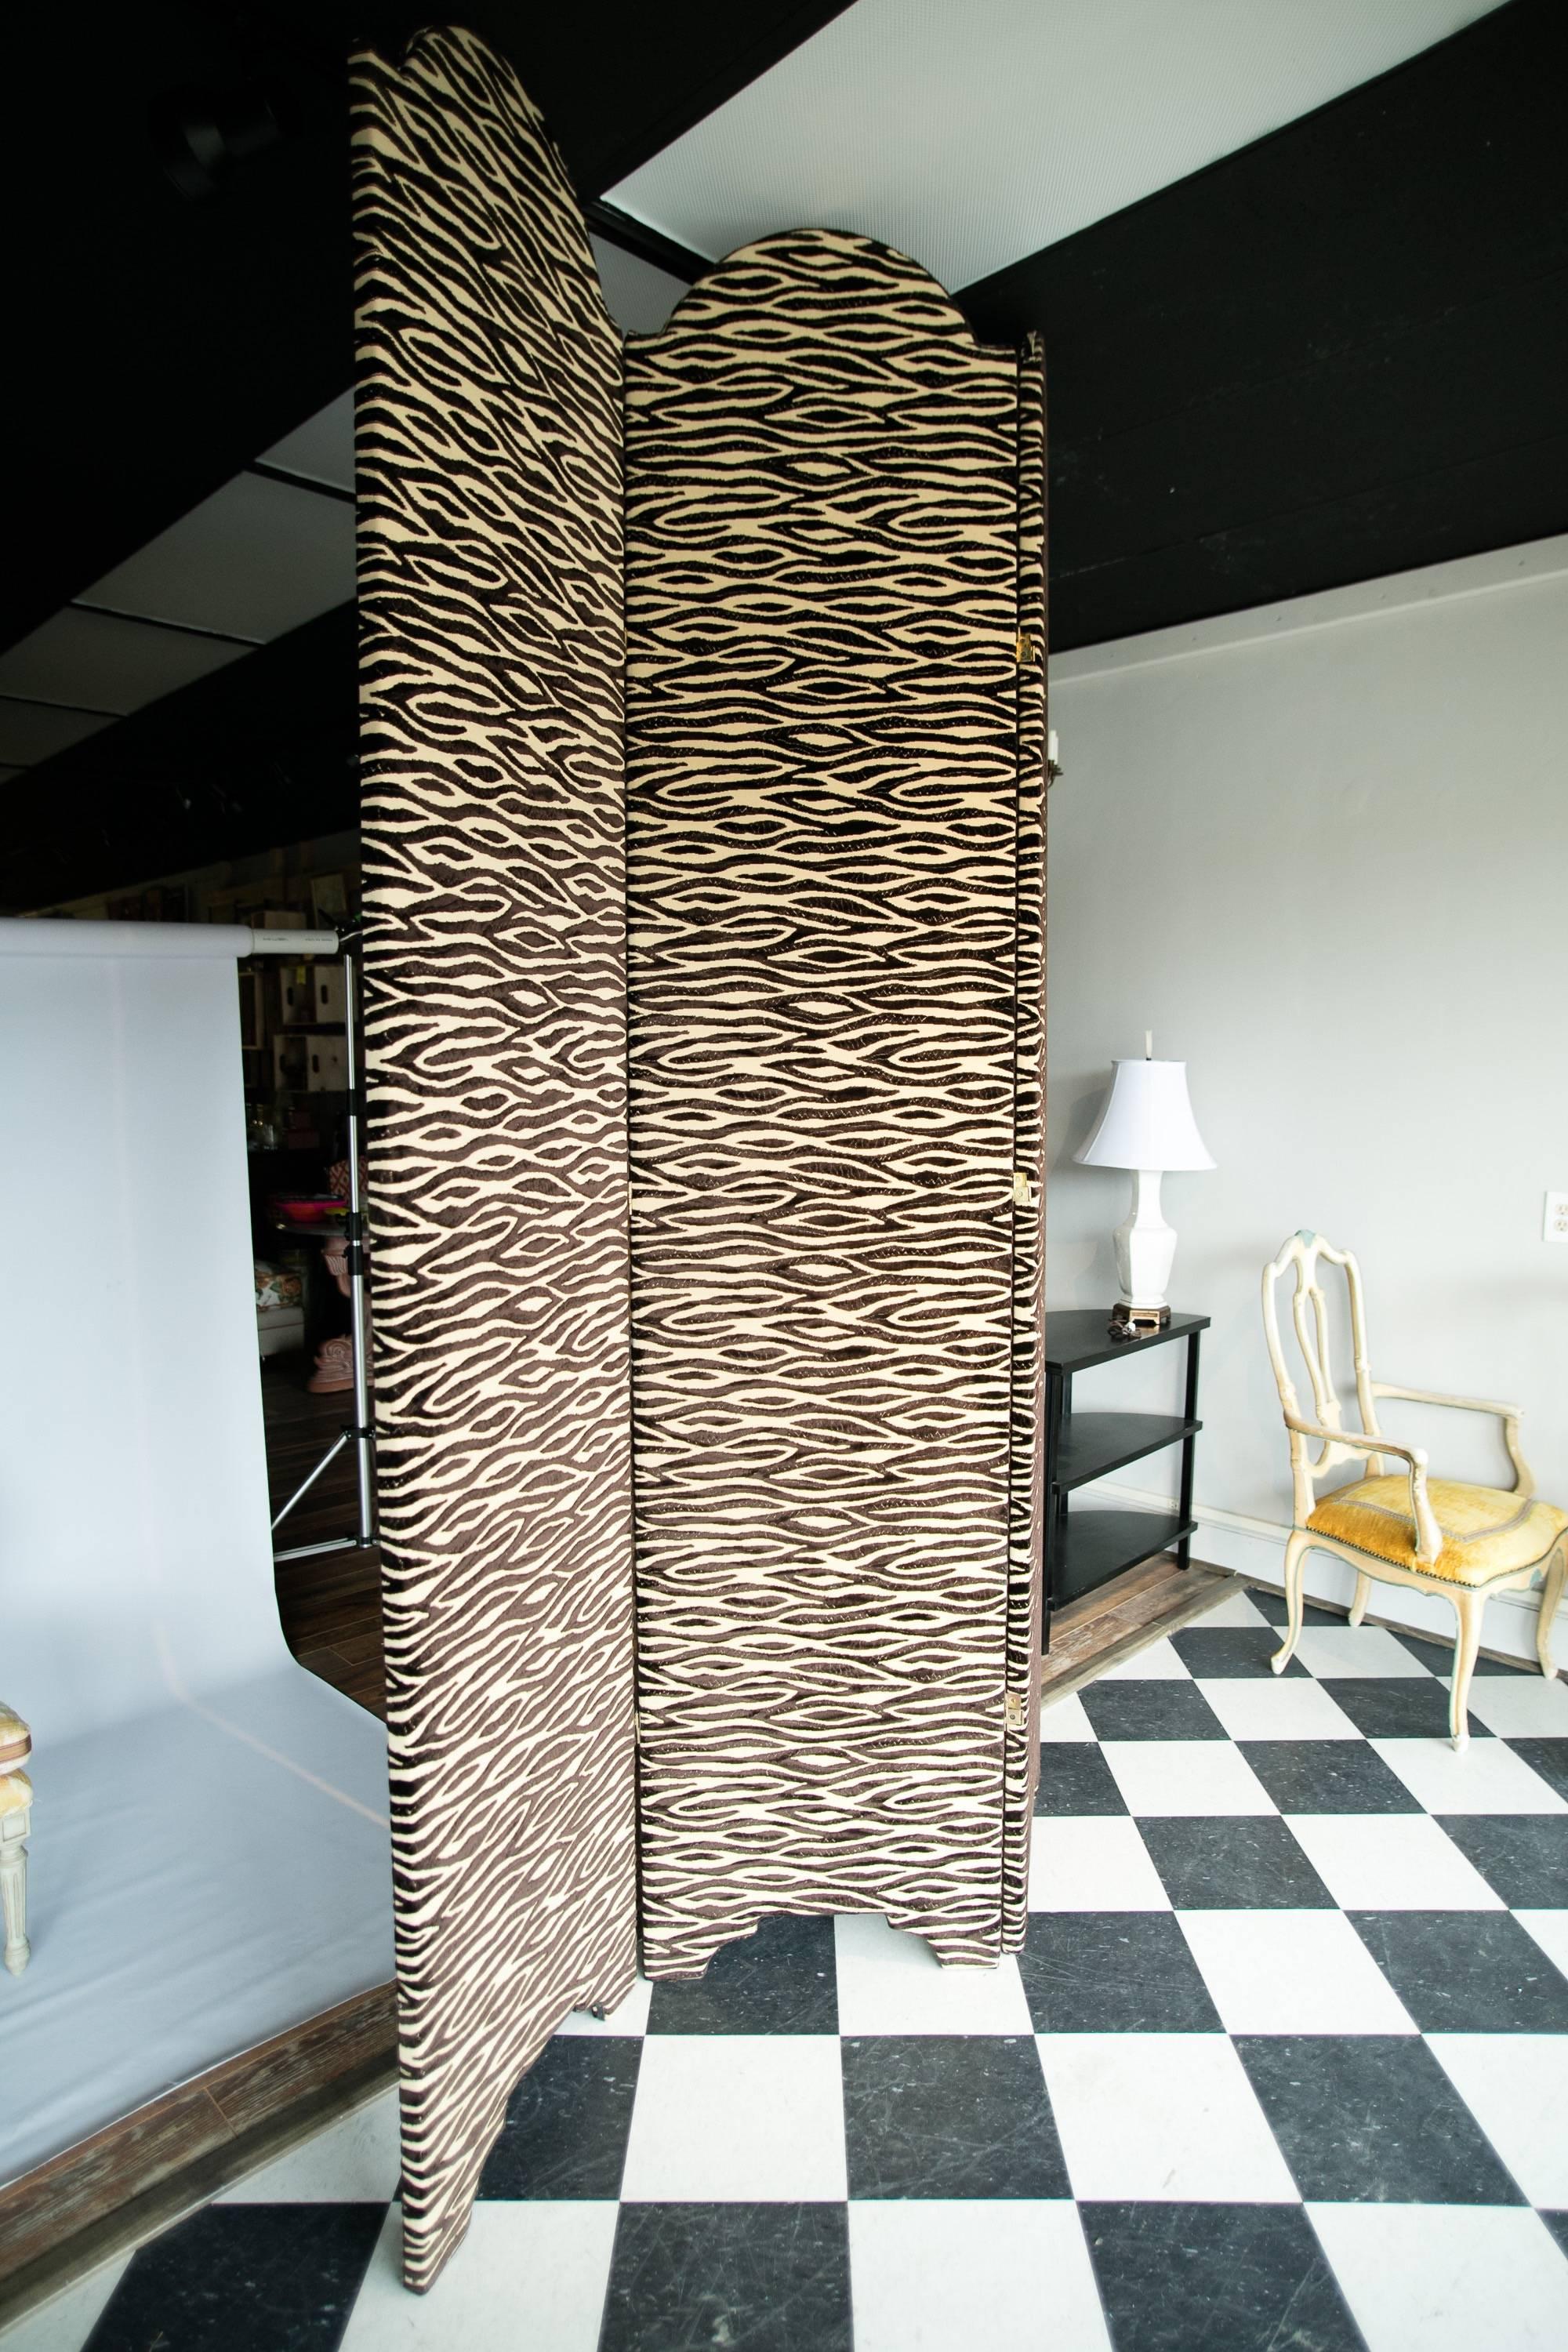 A contemporary upholstered screen from Baker Furniture. The screen is upholstered in a zebra-print black-and-tan cut velvet. The panels are arched on the top and have ogee-style legs. The panels are outlined on one side with bronze-colored nail head